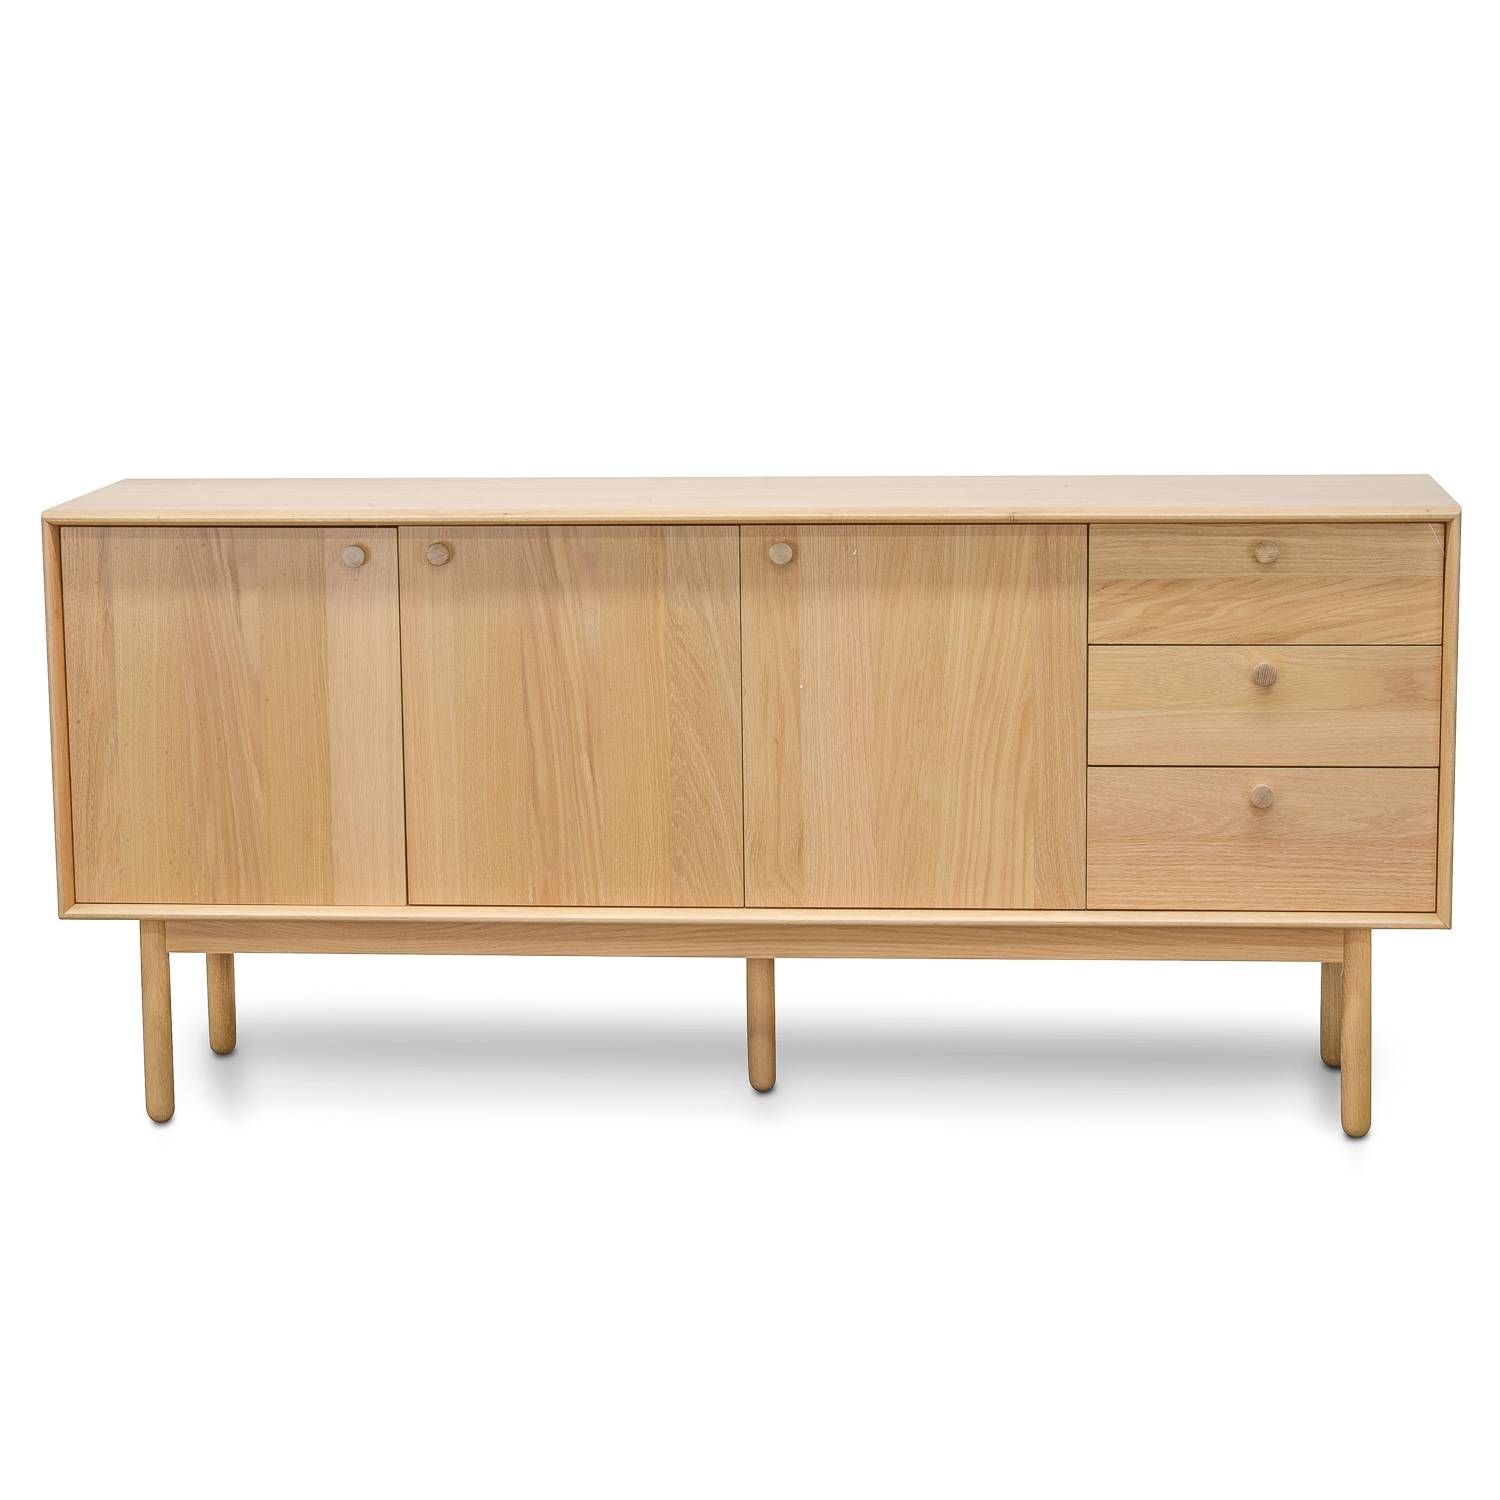 Buffet Furniture | Buy Sideboards And Buffets Online | Interior Throughout Sydney Sideboards And Buffets (View 15 of 15)